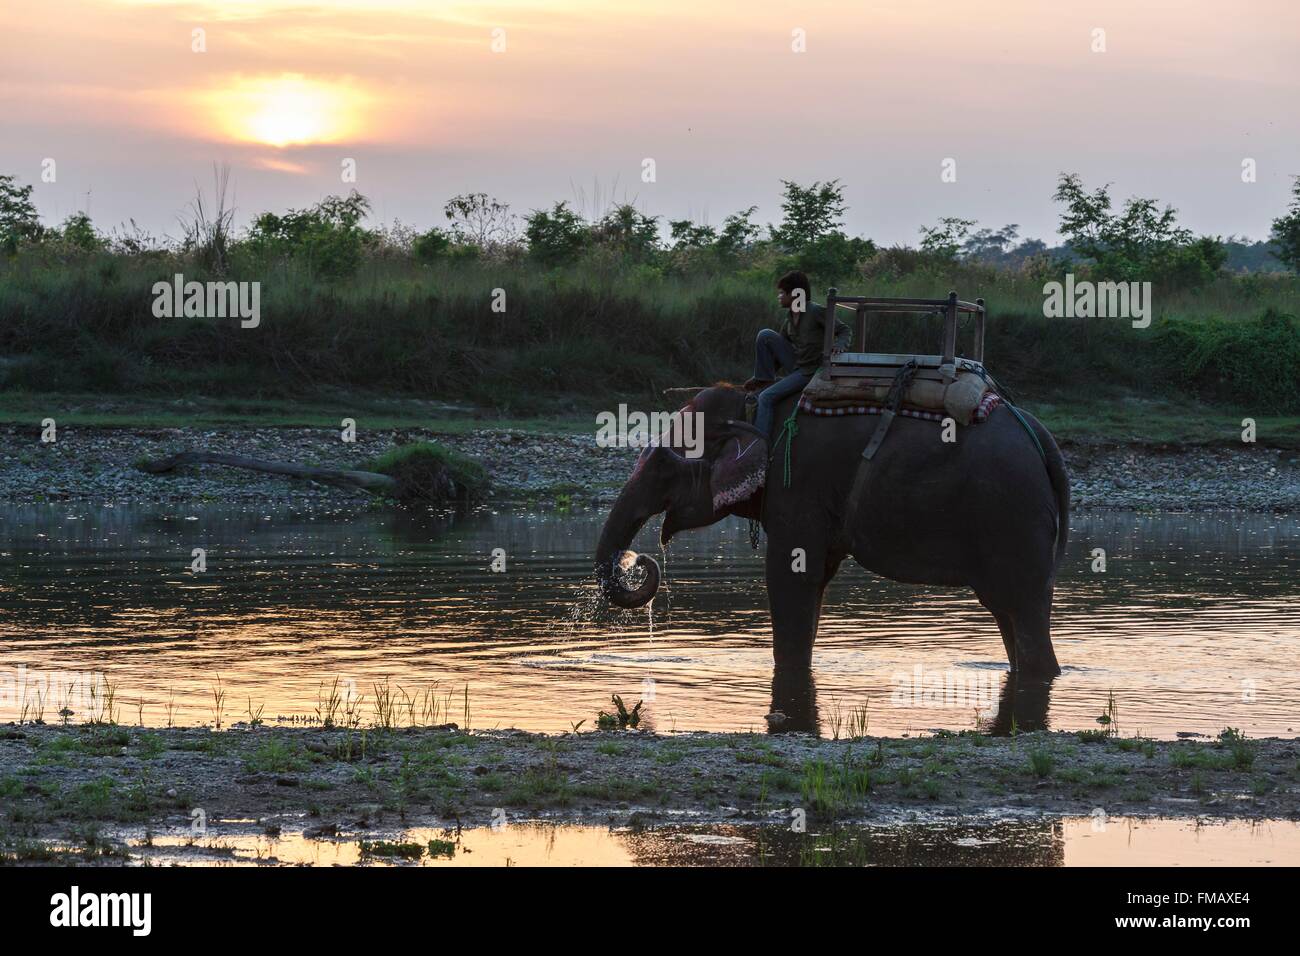 Nepal, Narayani zone, Sauraha, Chitwan national park listed as World Heritage by UNESCO, elephant driver on his elephant at Stock Photo